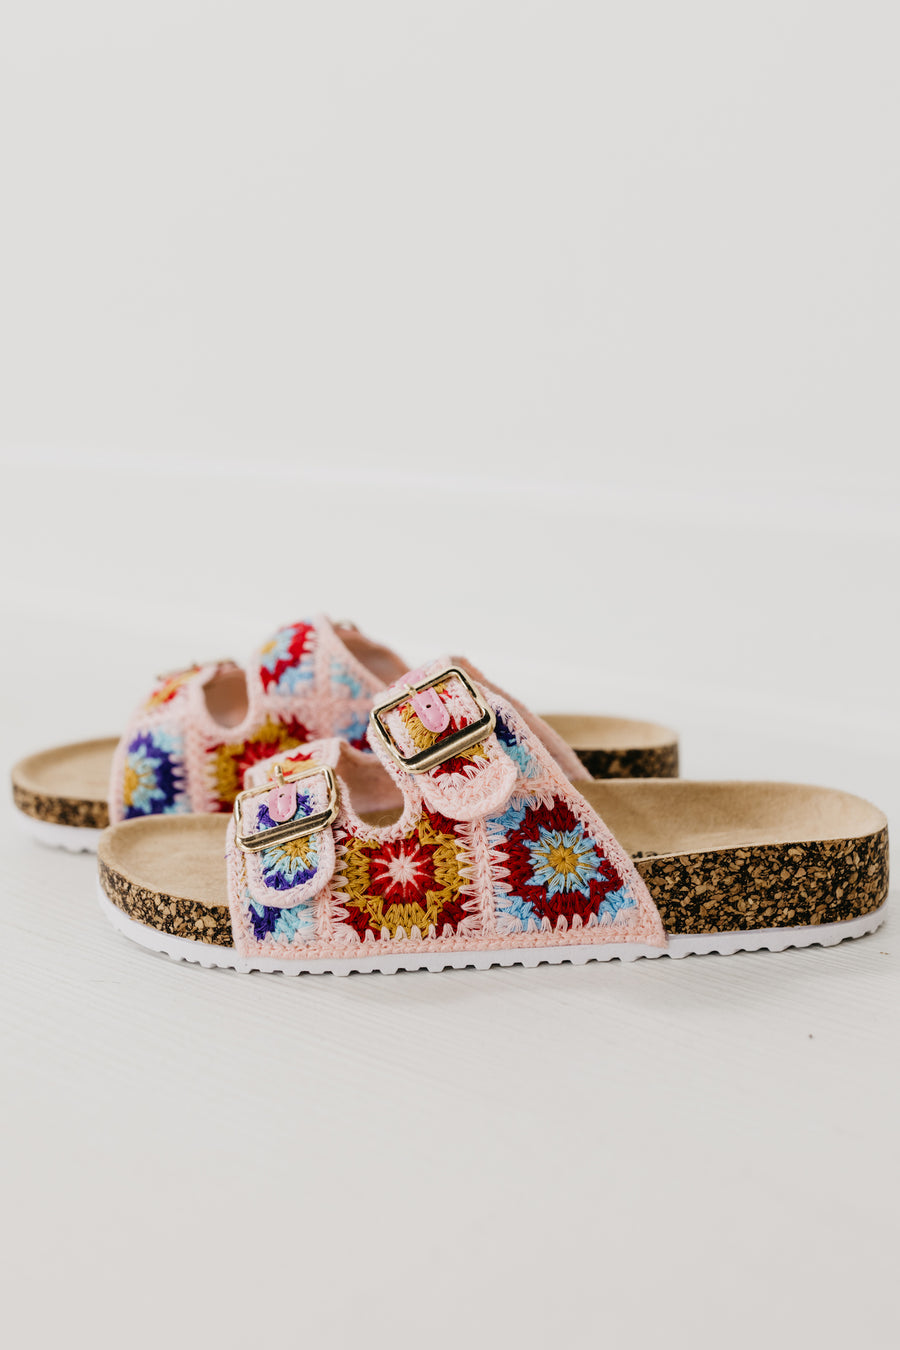 The Bacon Embroidered Sandal